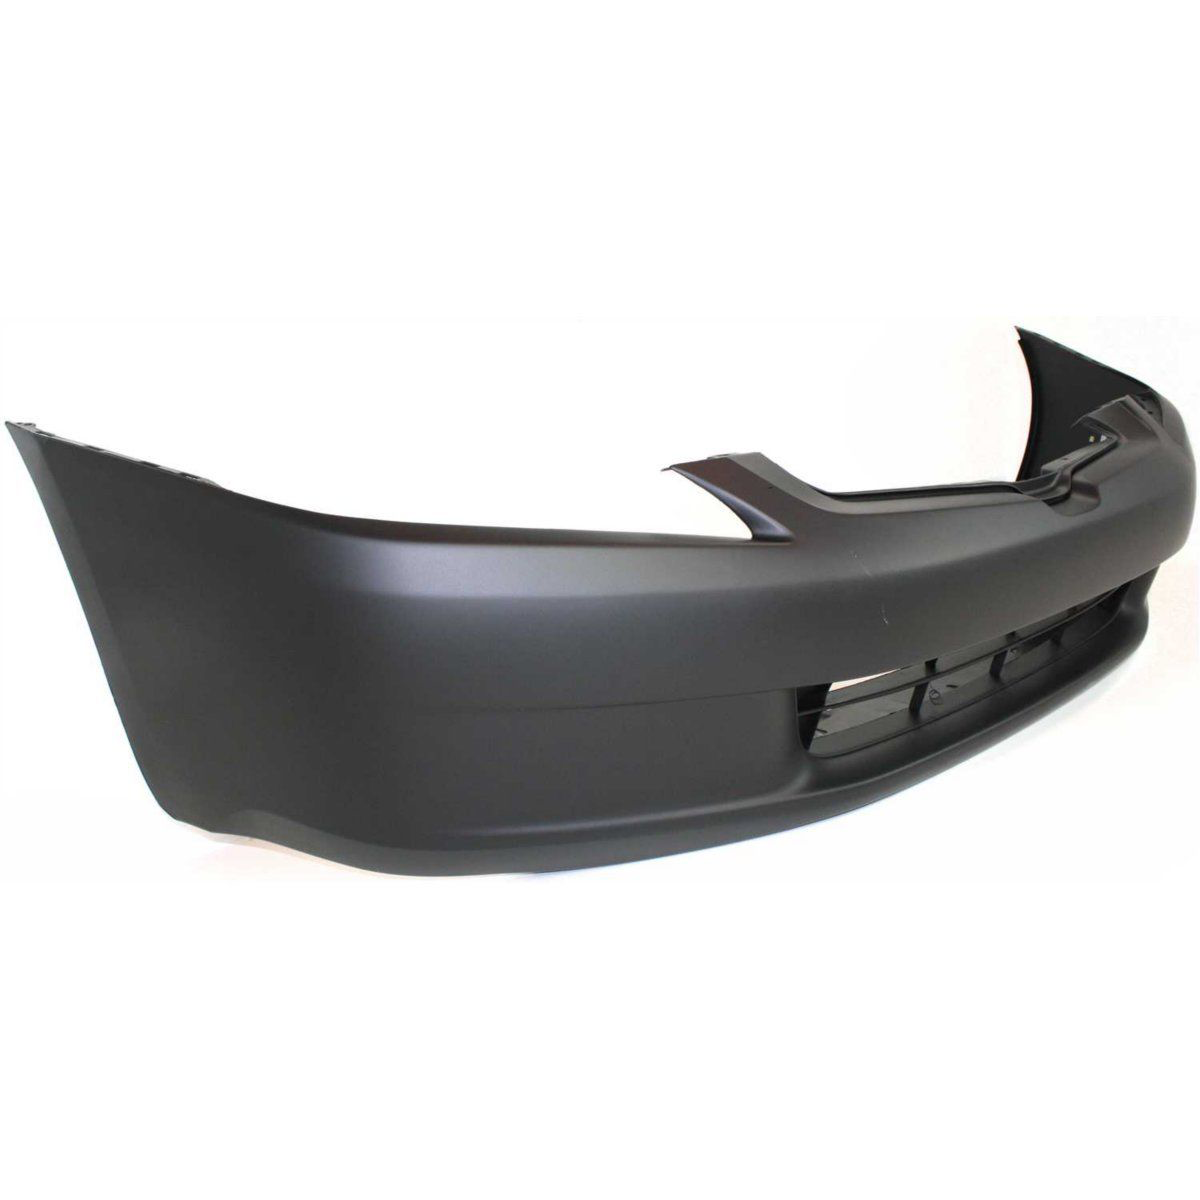 2003-2005 HONDA ACCORD Front Bumper Cover 4dr sedan Painted to Match